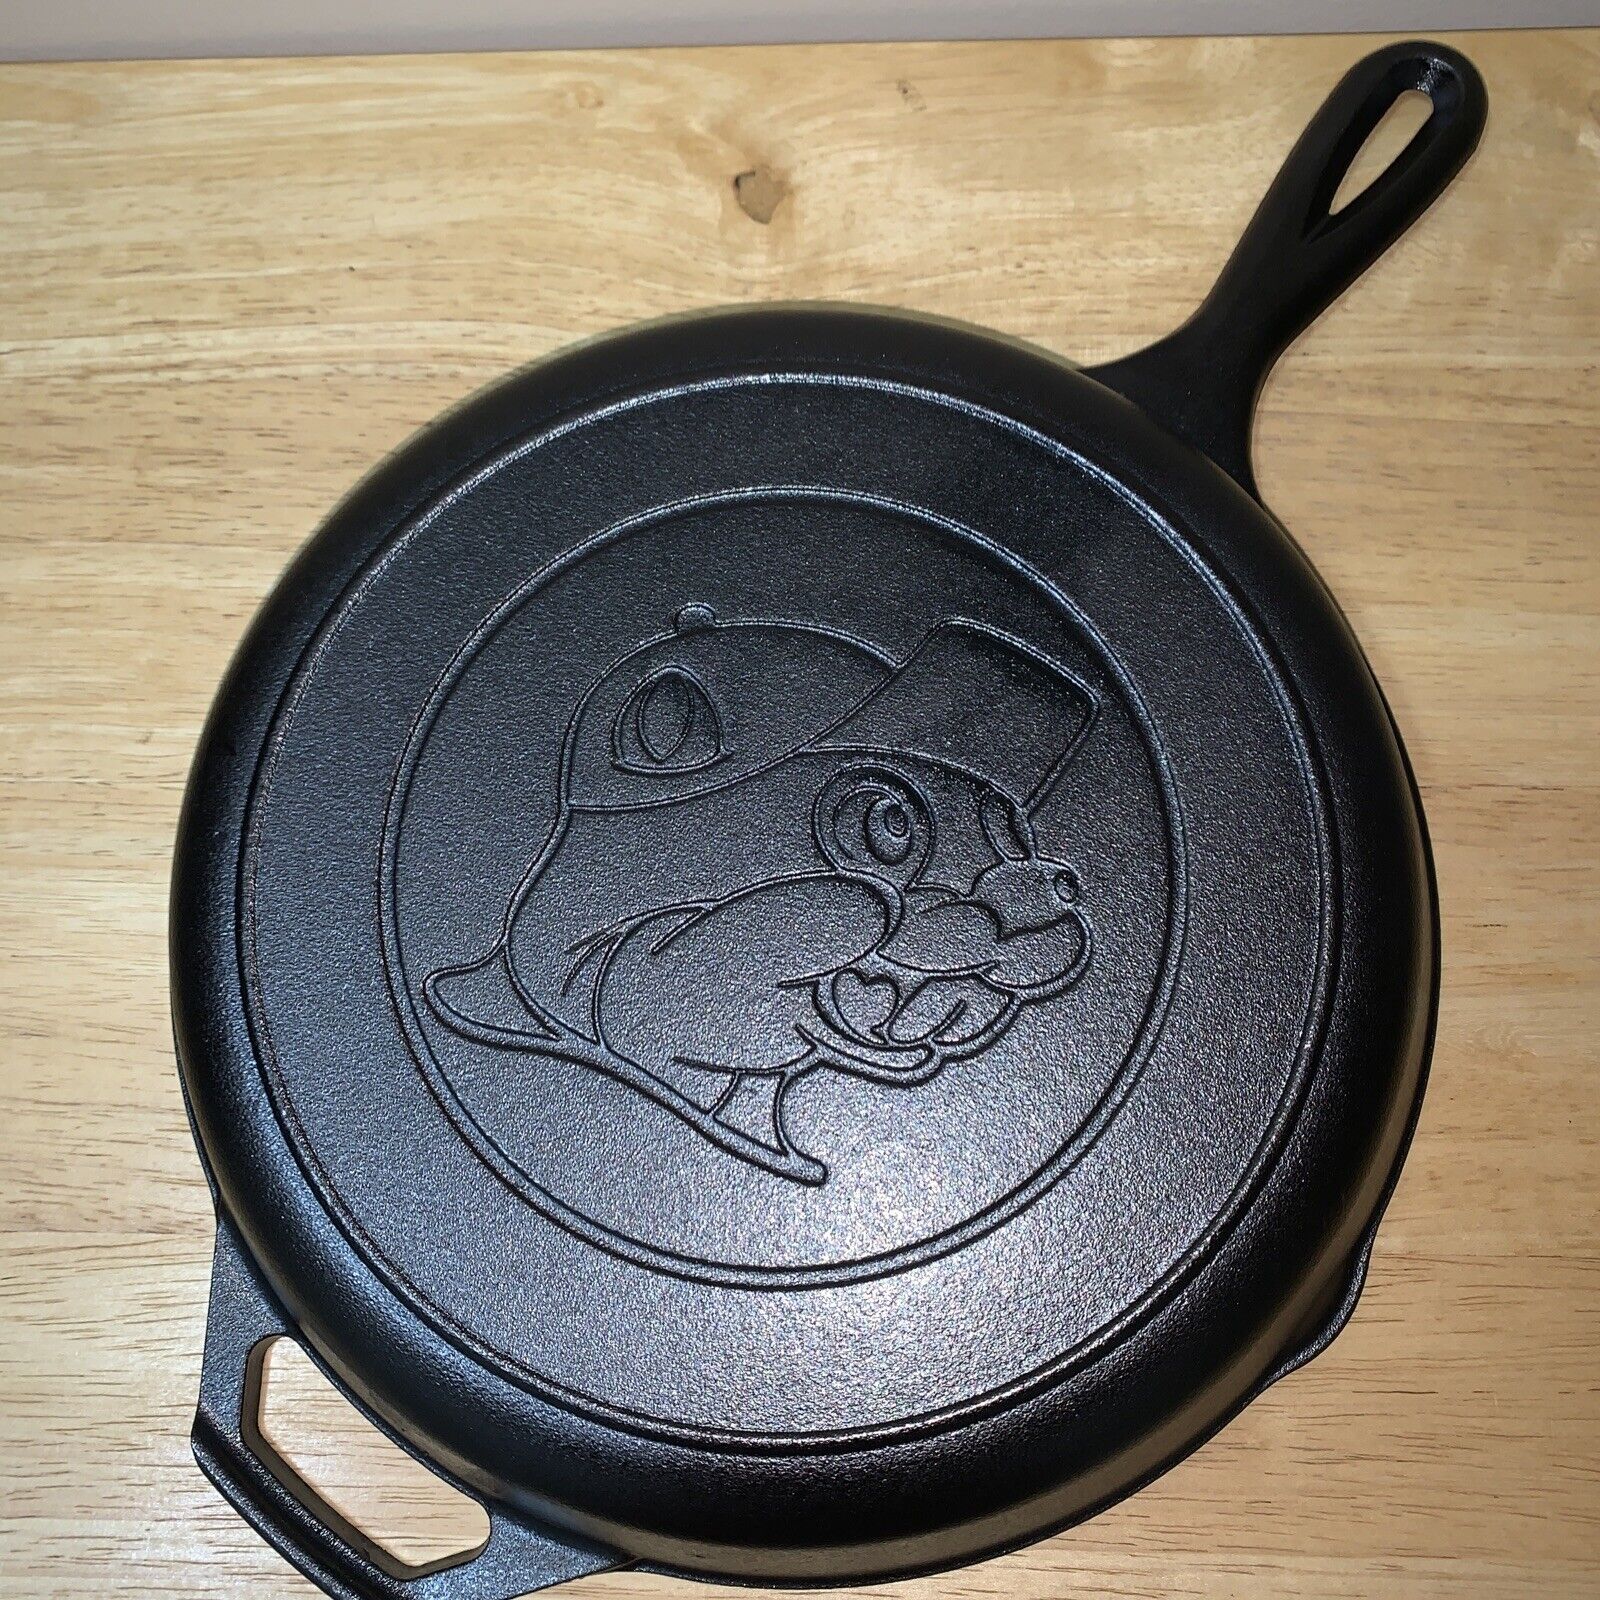 BRAND NEW BUC EES BUC-EE’S LODGE CAST IRON SKILLET 10.25 INCH BEAVER MEAT NWT